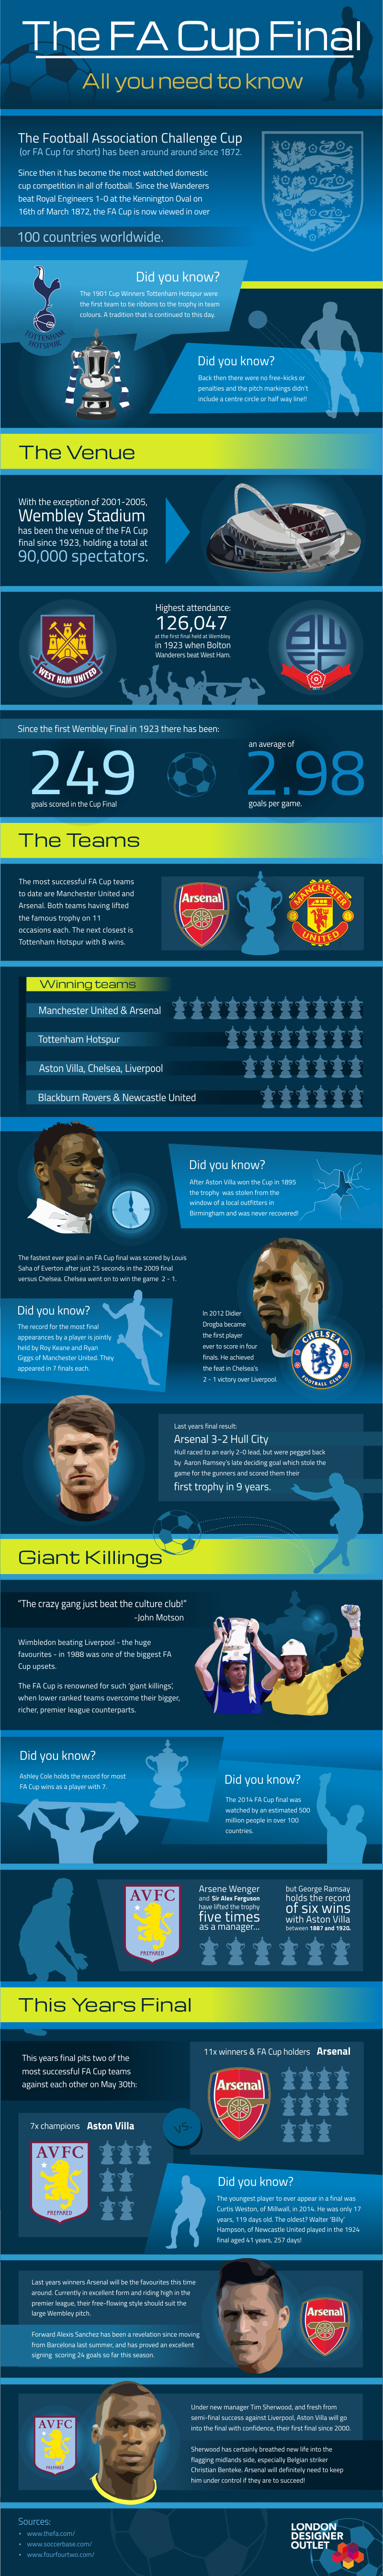 fa-cup-infographic-v3